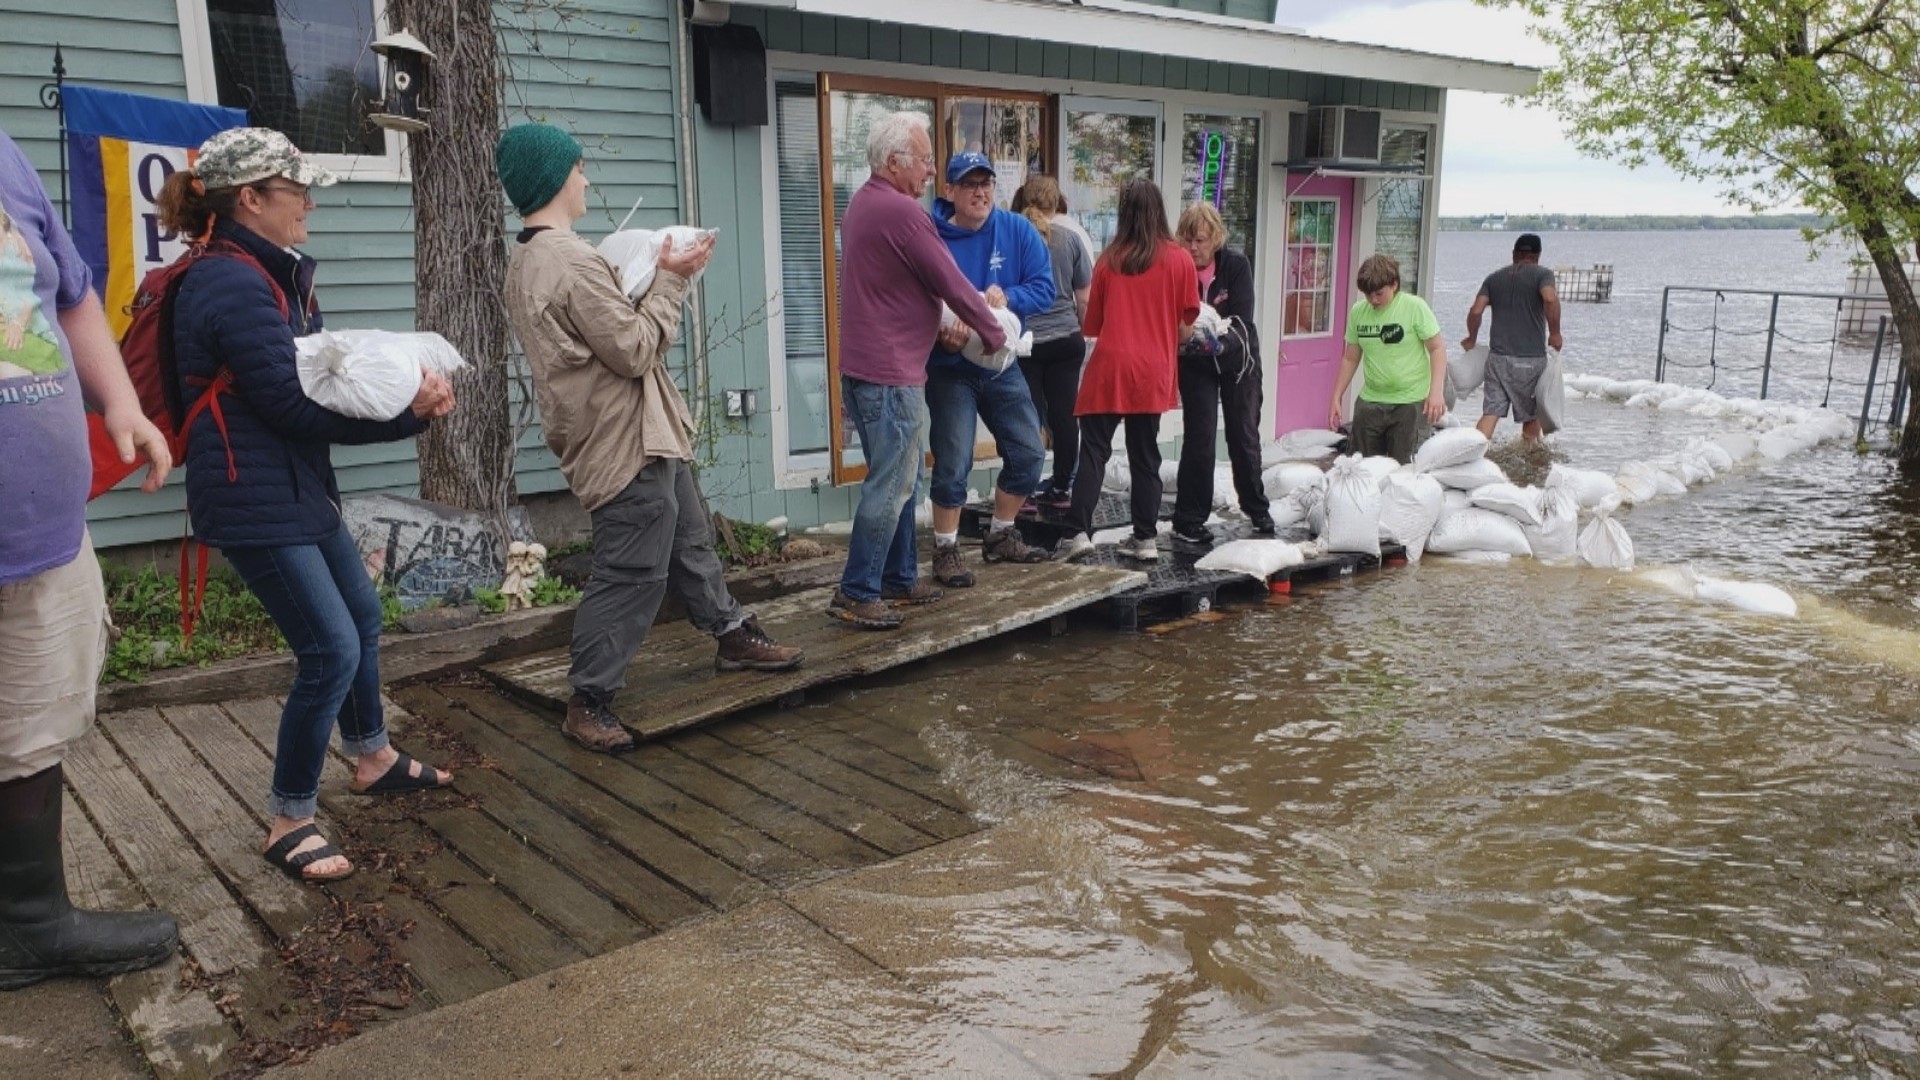 Koochiching County Sheriff Perryn Hedlund said they're putting out up to 50,000 sandbags per day but at the end of the night, "there's not a single sandbag left."